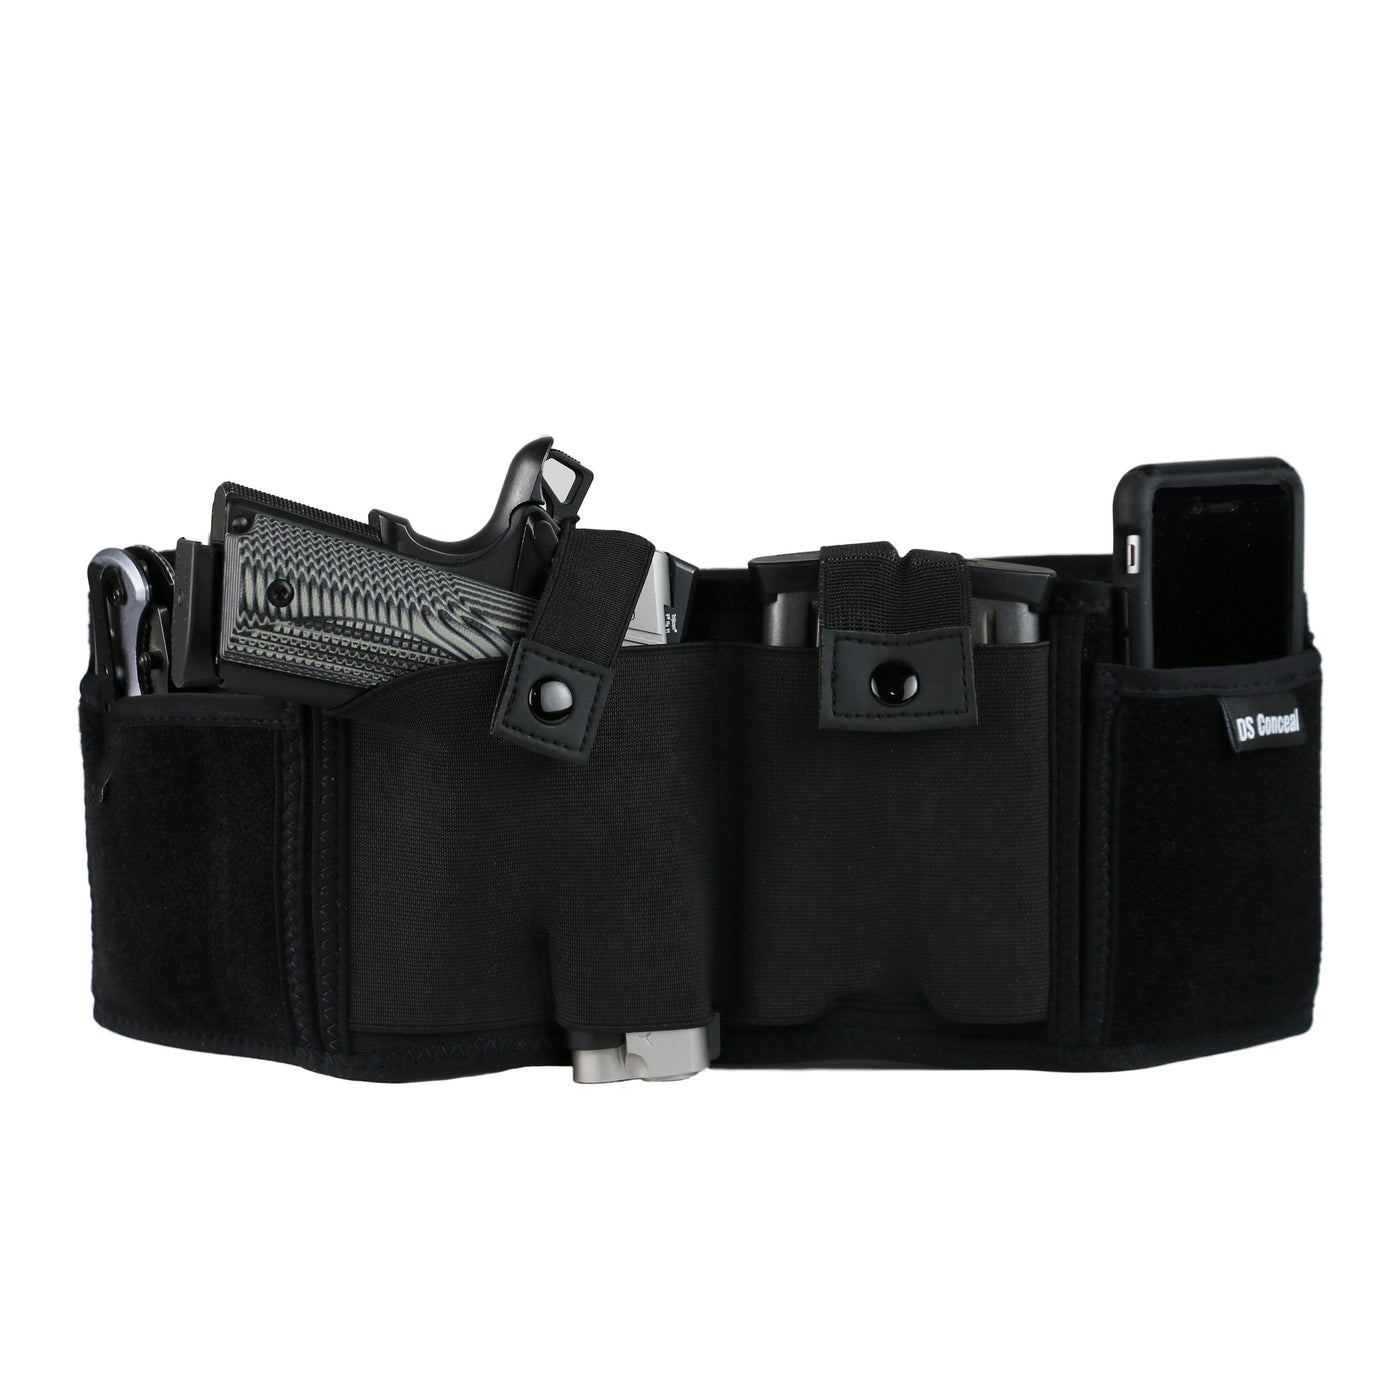 Unisex Neoprene Belly Band for Concealed Carry -  Lady Conceal -  Holsters -  Leather Belly Band pistol bag -  Tactical womans purse for pistol -  Concealed Belly Band -  most popular crossbody bag -  crossbody handgun bag -  crossbody bags for everyday use -  Lady Conceal -  Unique Hide Purse -  Locking YKK Purse -  Fanny Pack for Gun and Pistol -  Easy CCW -  Fast Draw Bag -  Secure Gun Bag